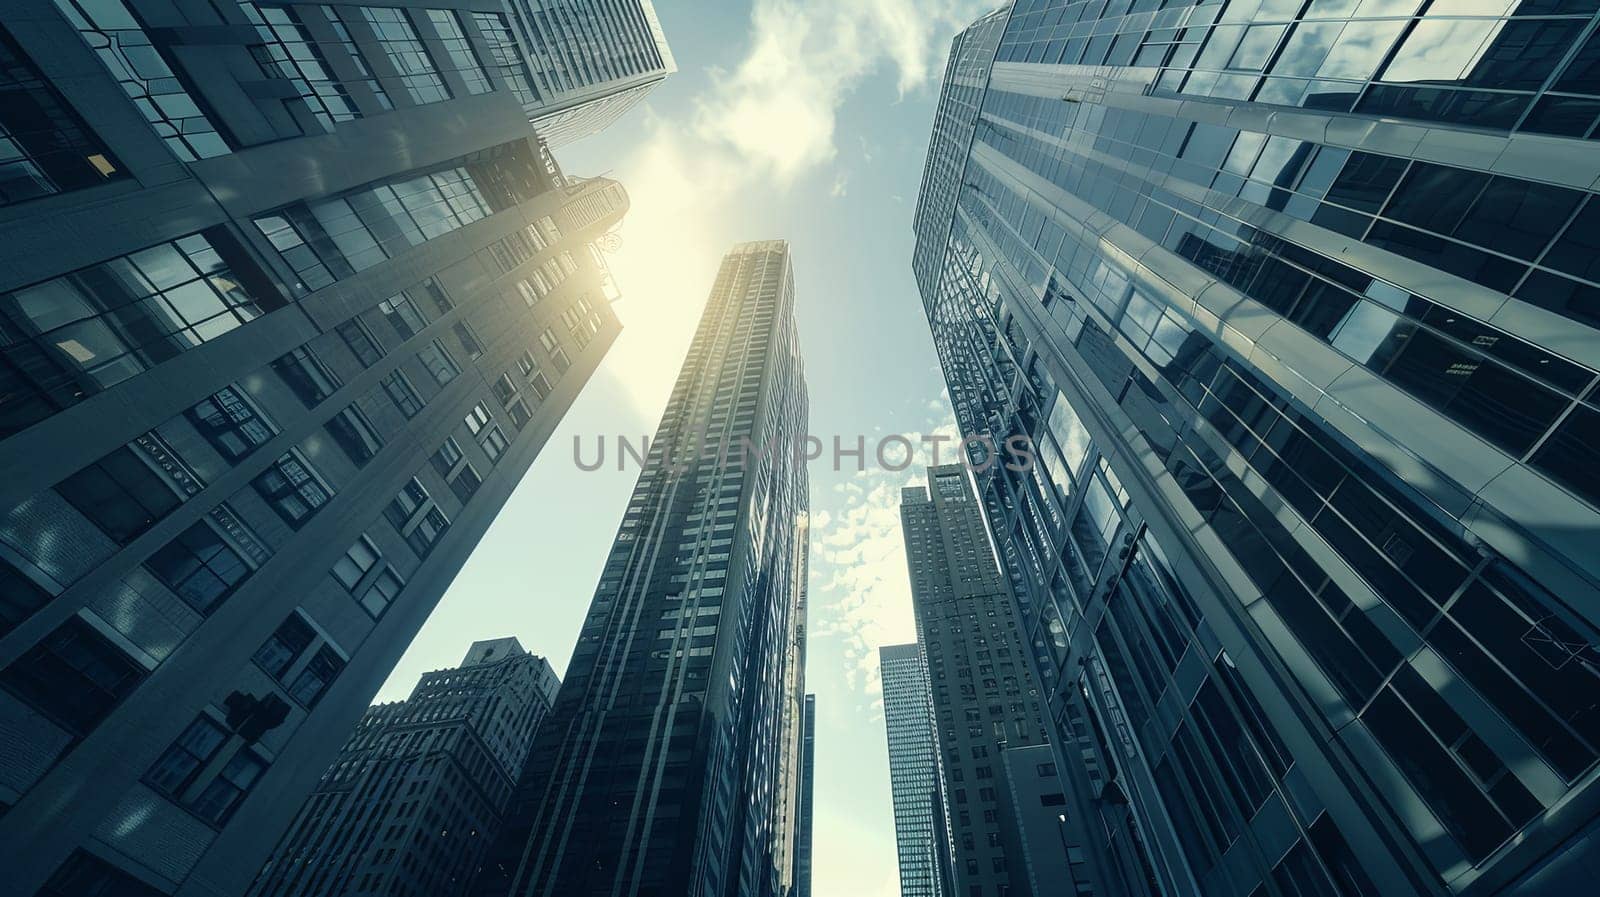 View from below of skyscrapers in an urban financial center, capturing the towering structures against the sky.